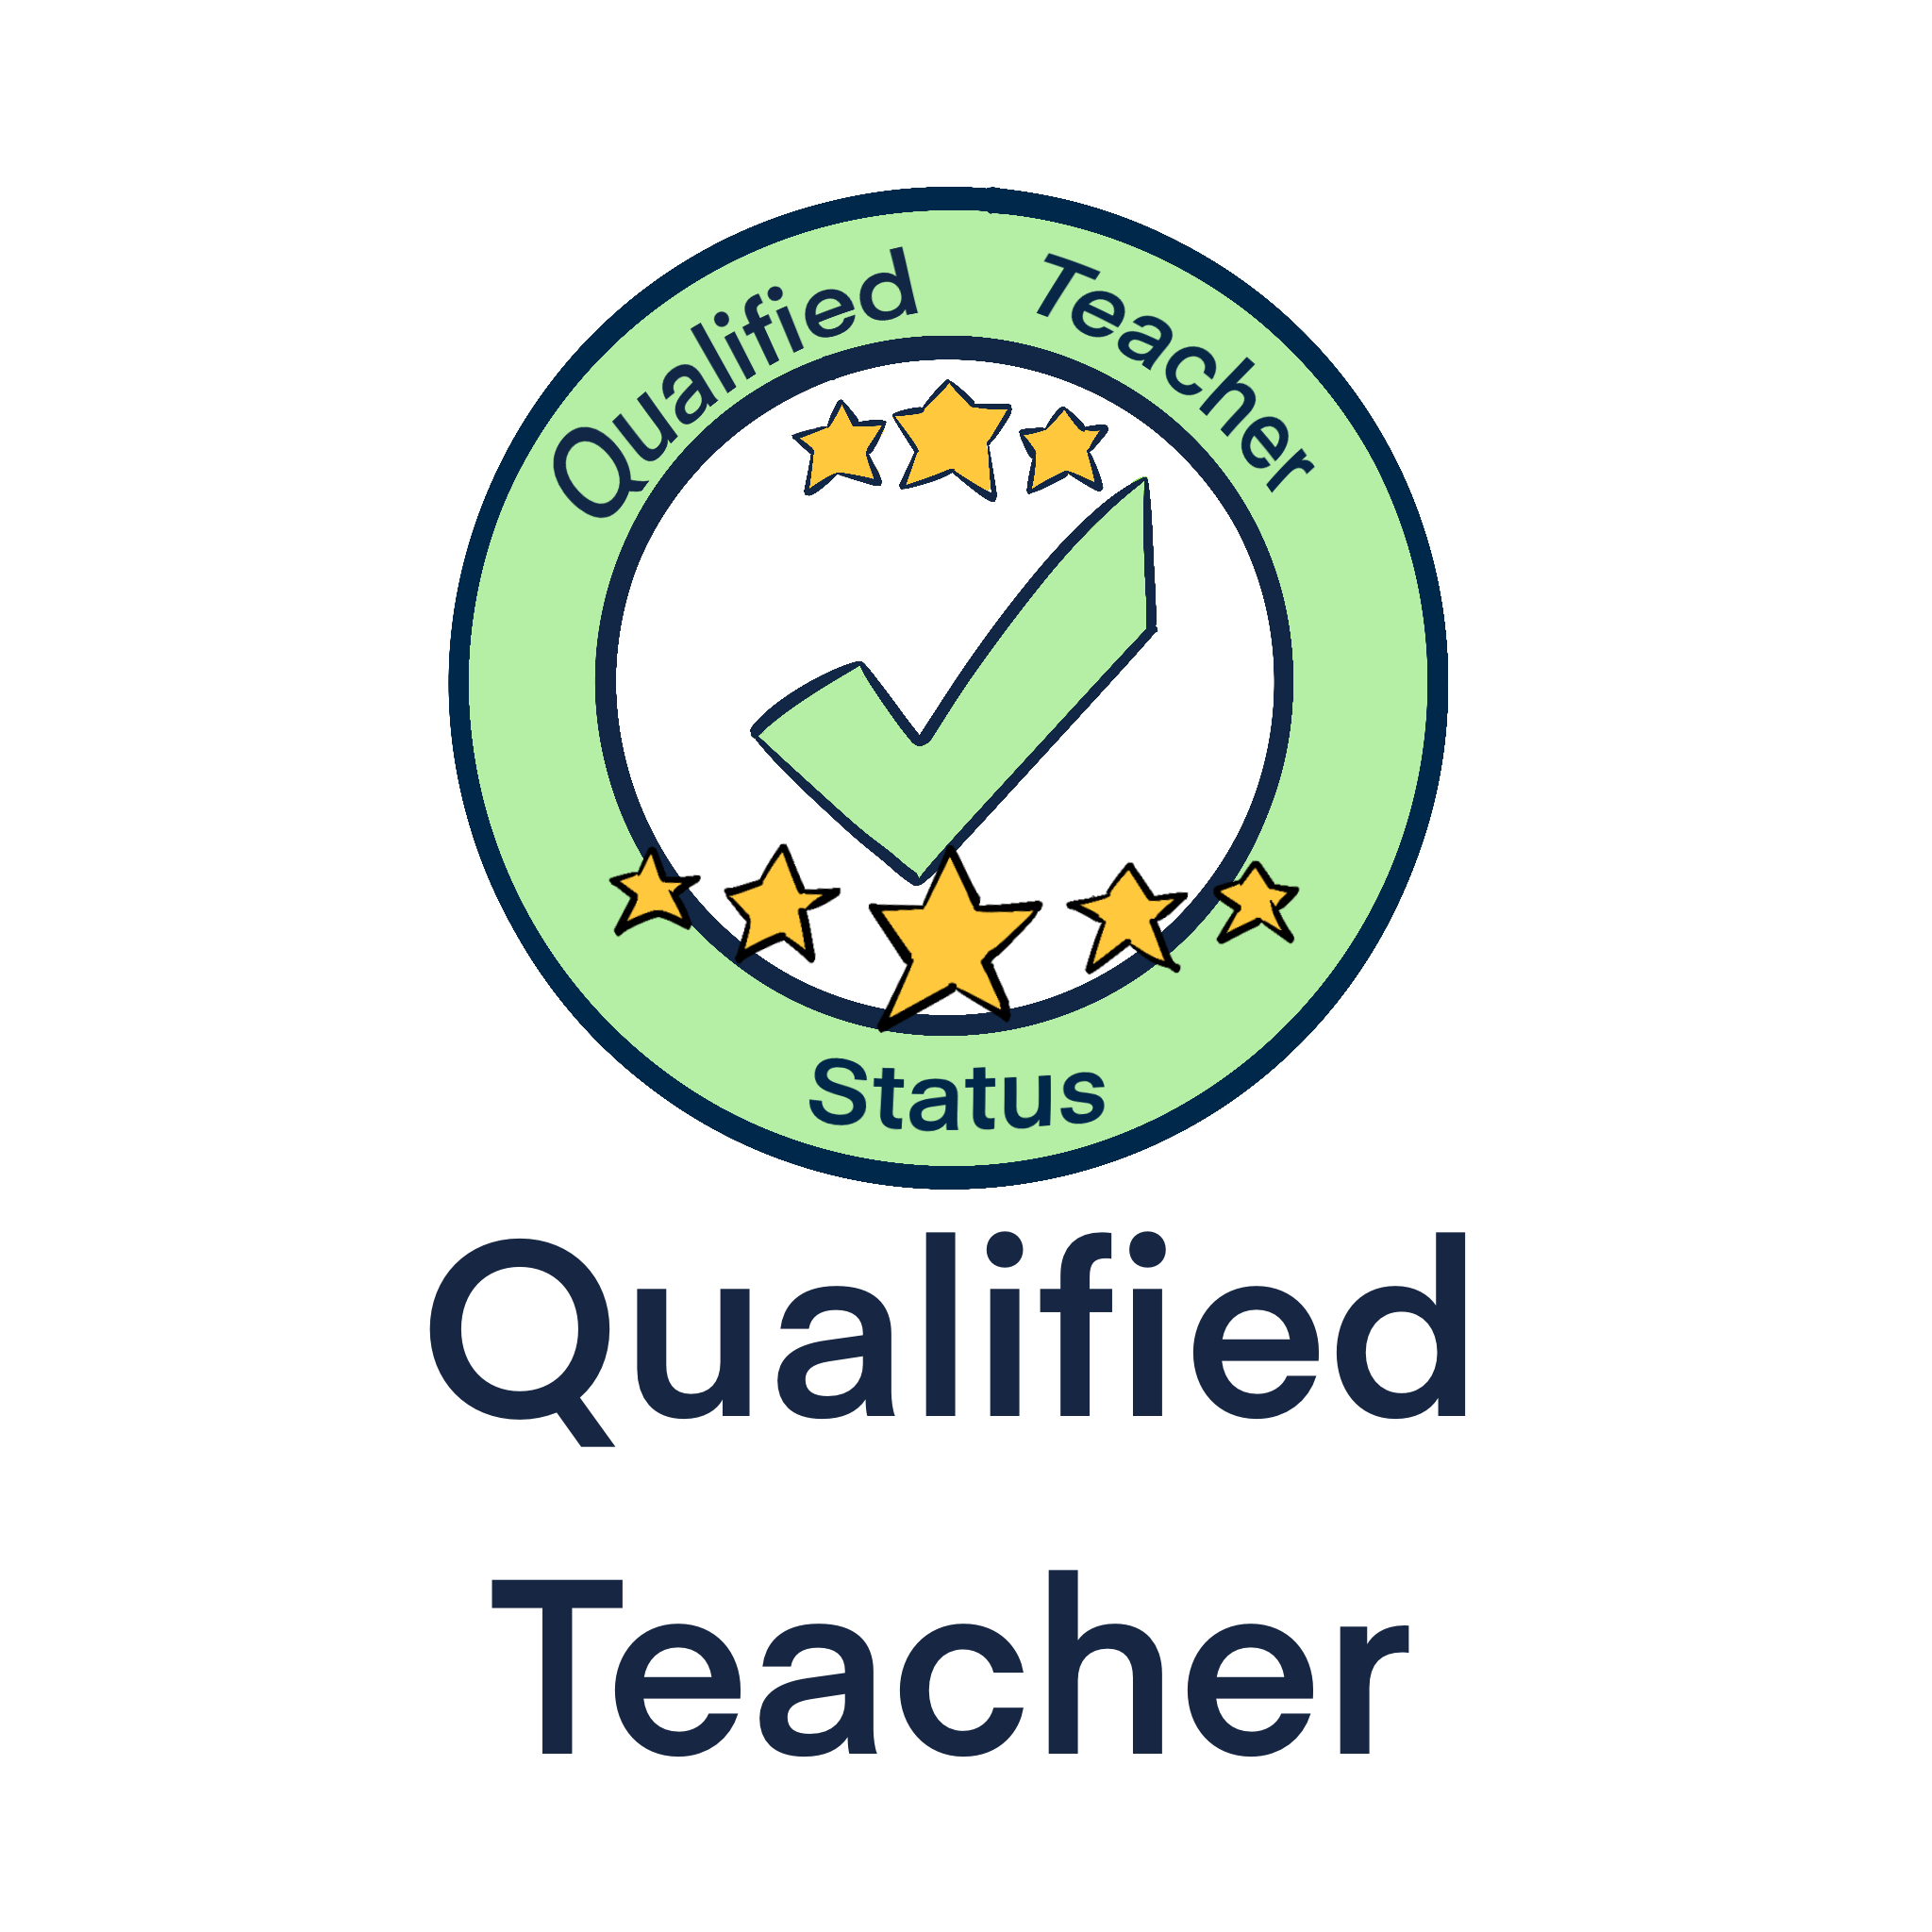 Like all our tutors, Richard is a qualified teacher